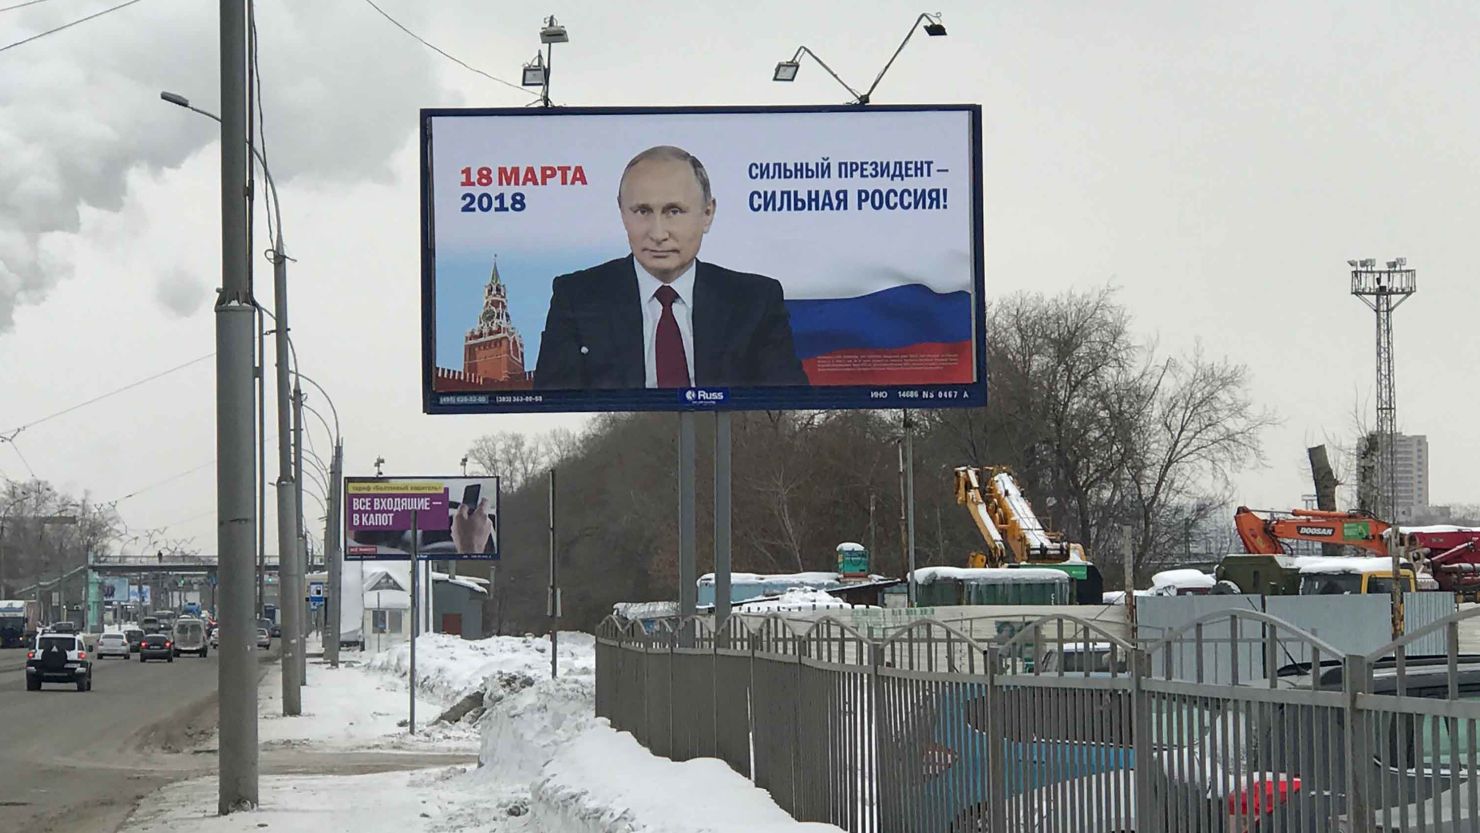 An election billboard in Novosibirsk, Siberia's largest city. 